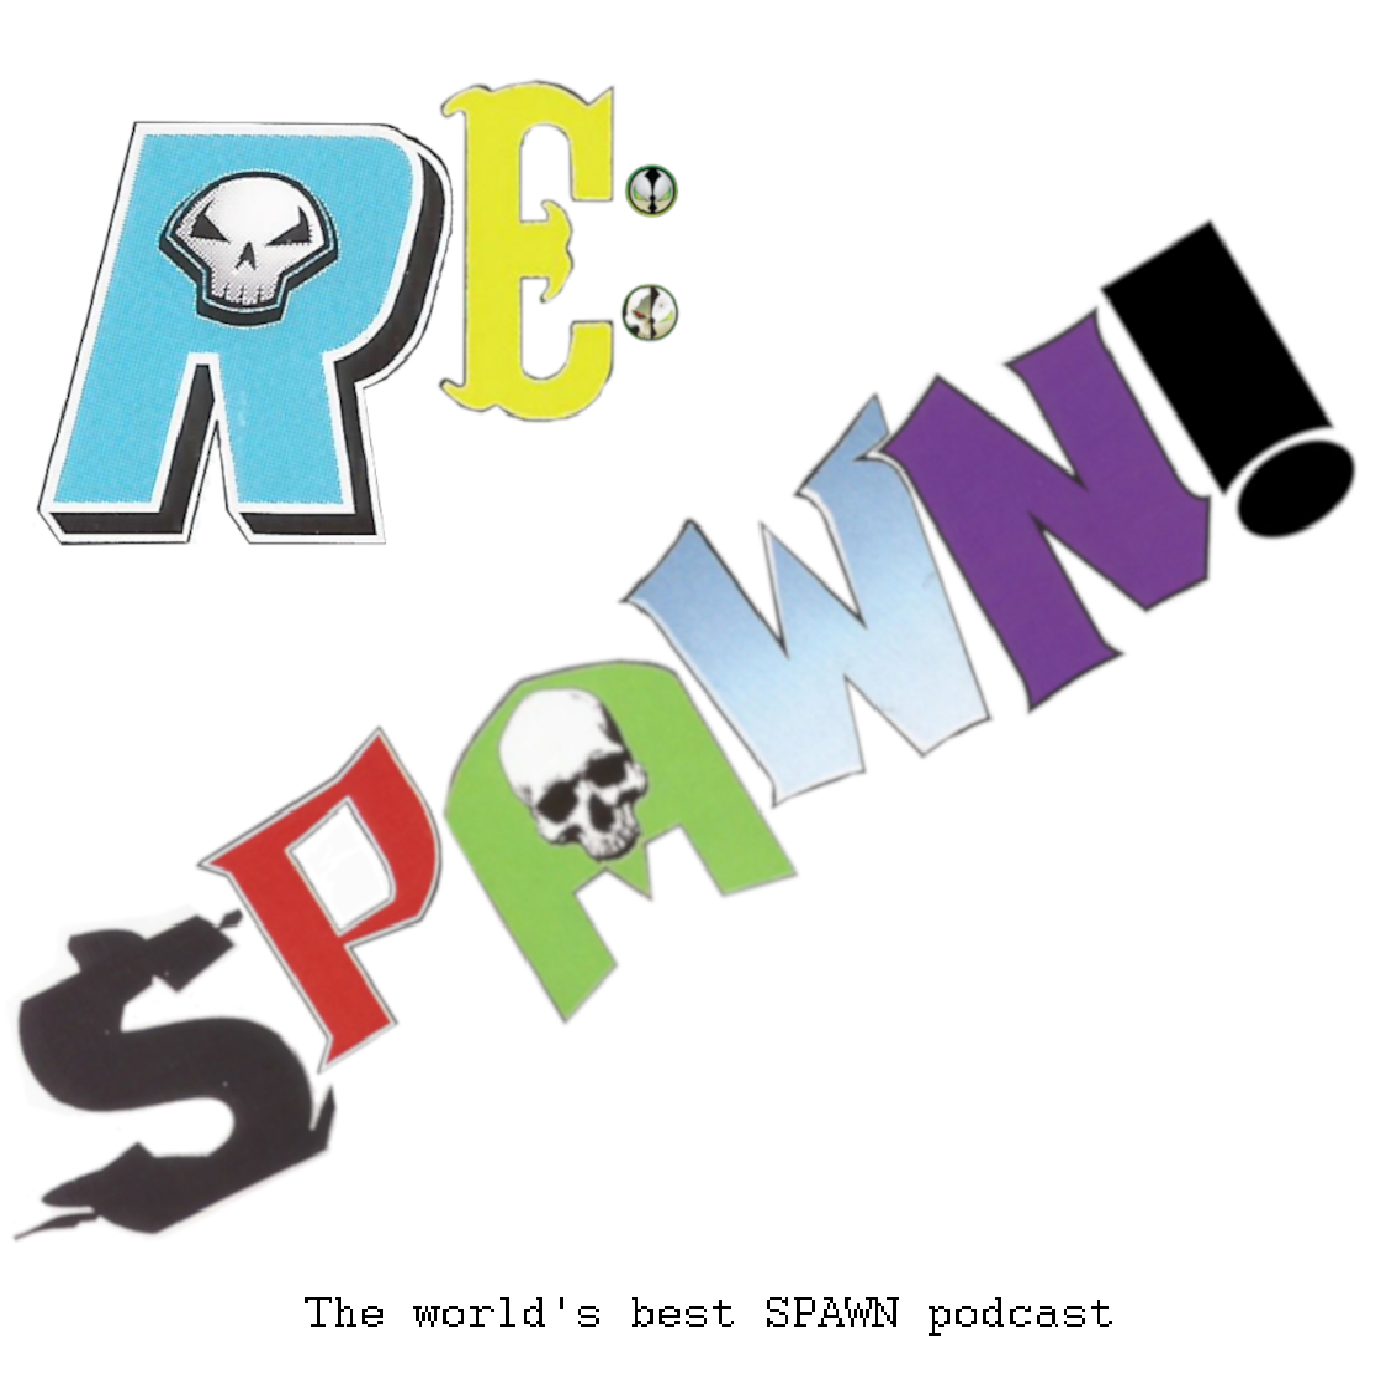 Episode 83 - Spawn 16 and Spawn 349